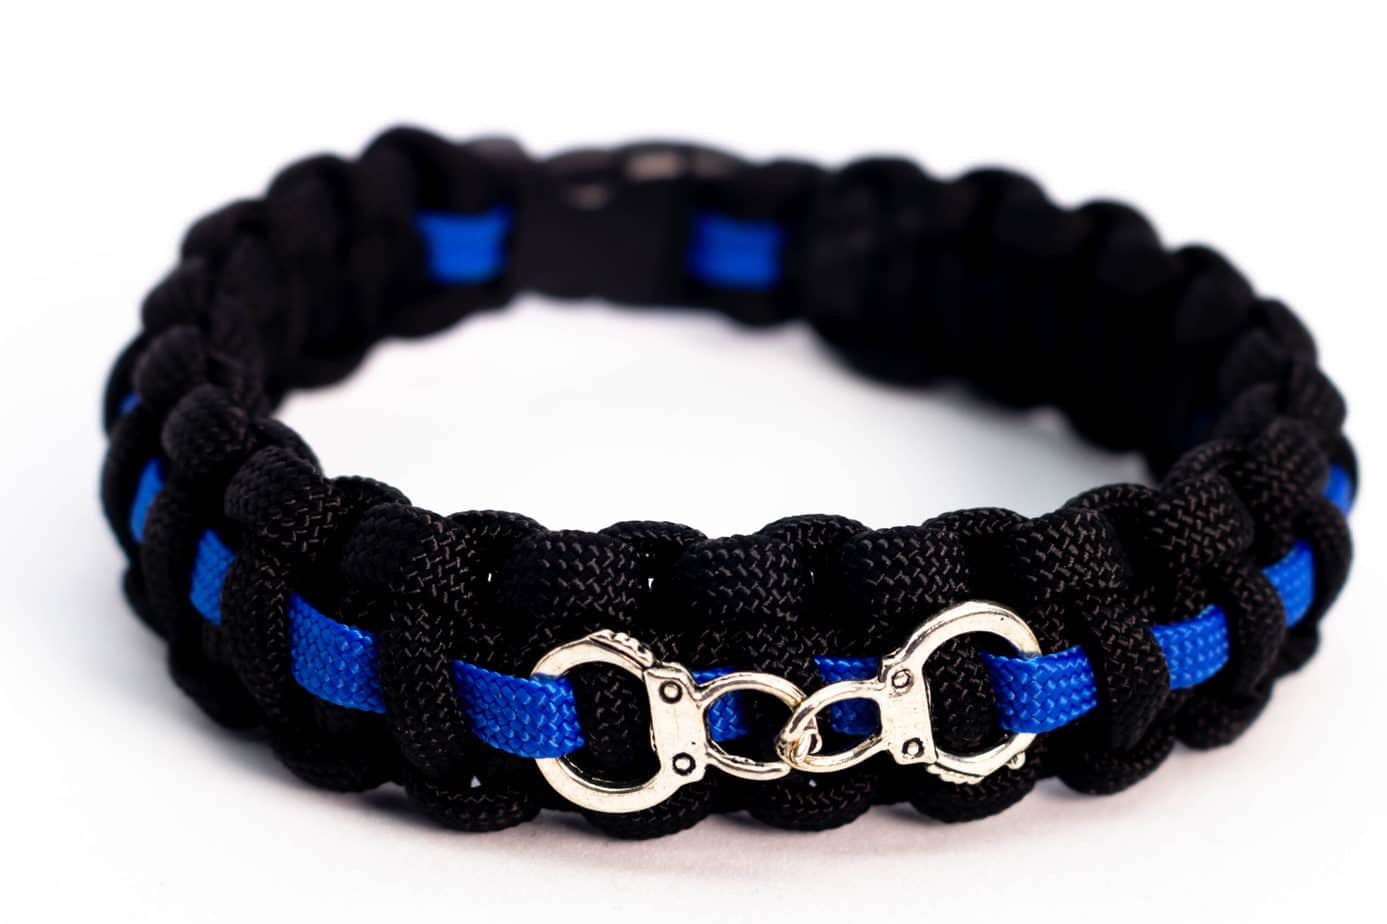 Paracord Wristband - Blue Line With Handcuffs - Thin Blue Line UK